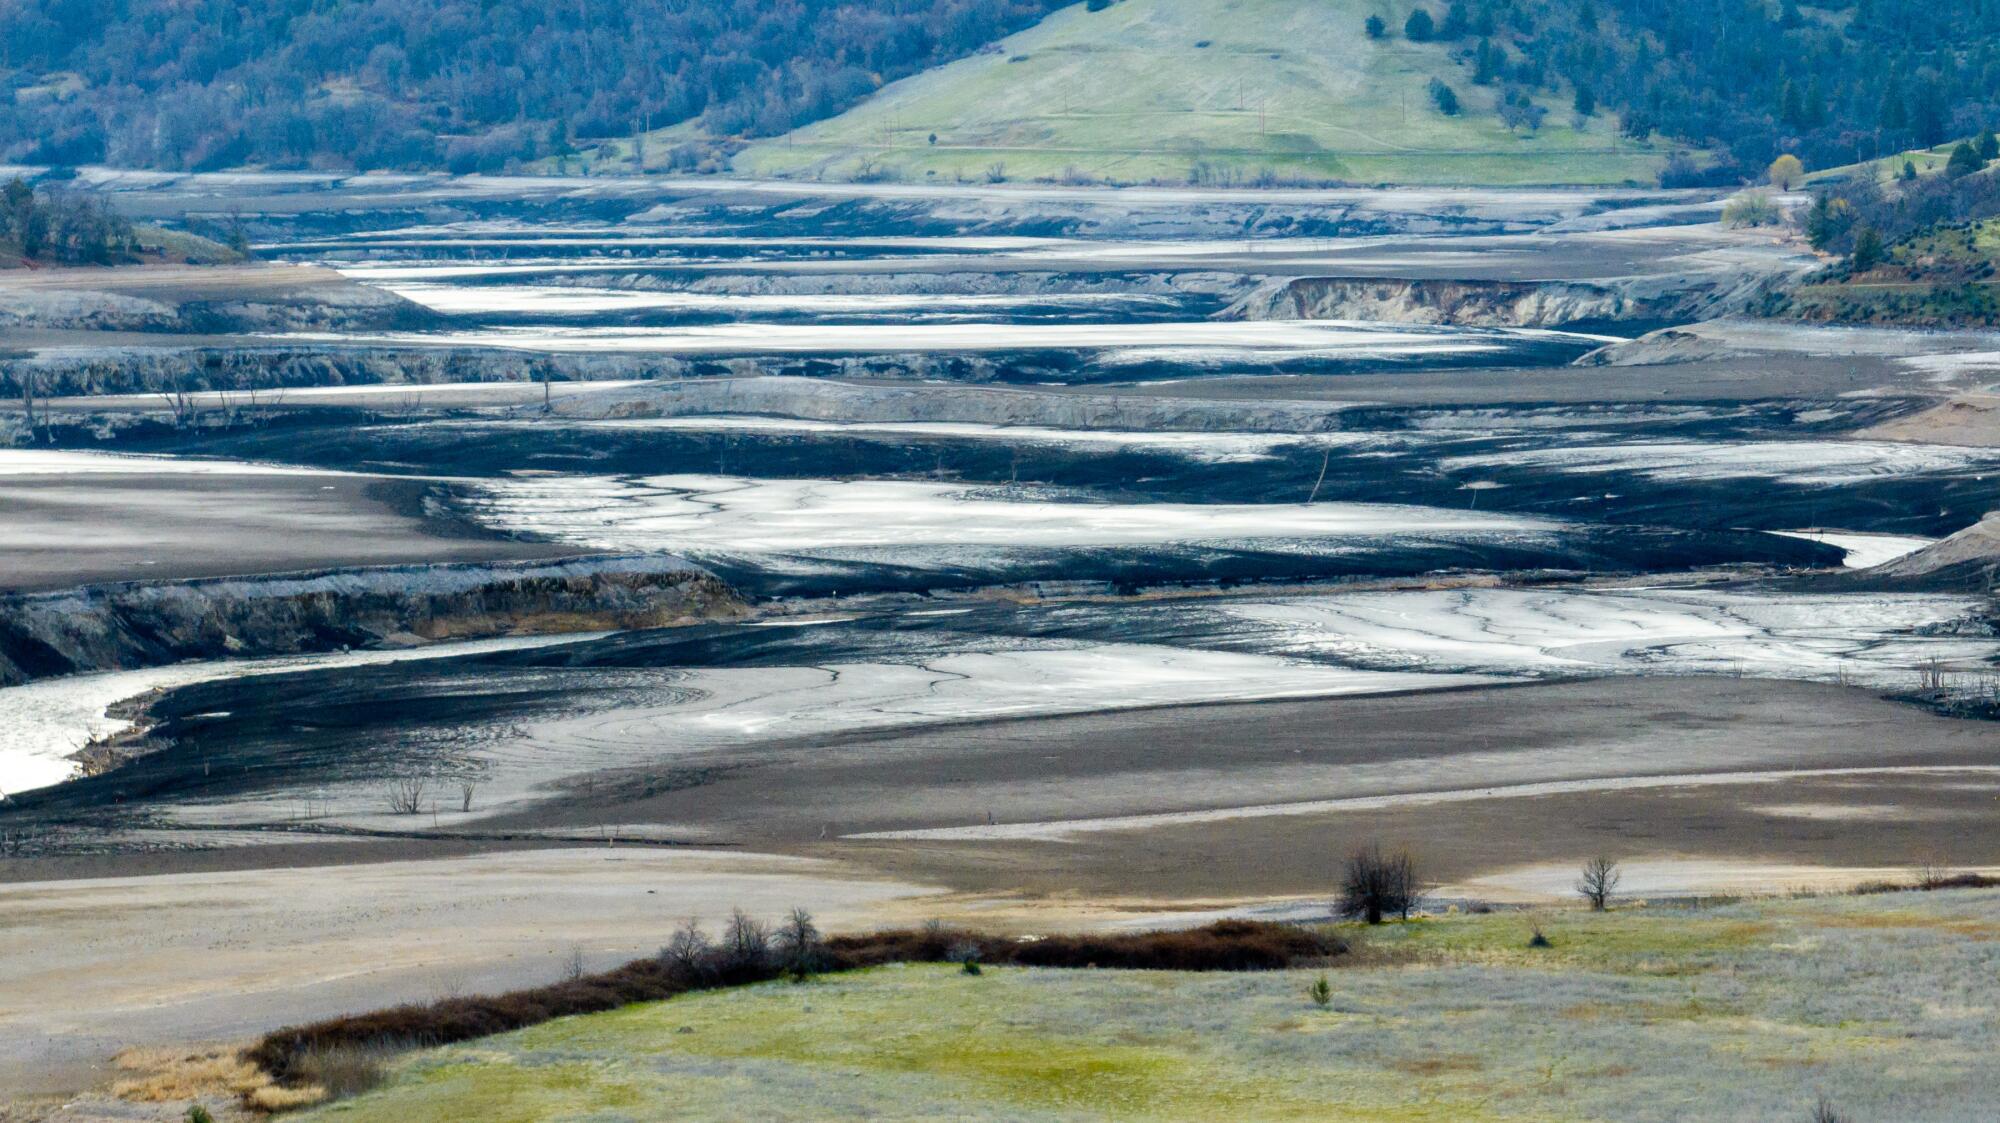 Water in a series of mudflats at decreasing elevations, from a hill in the background down to flat land in the foreground